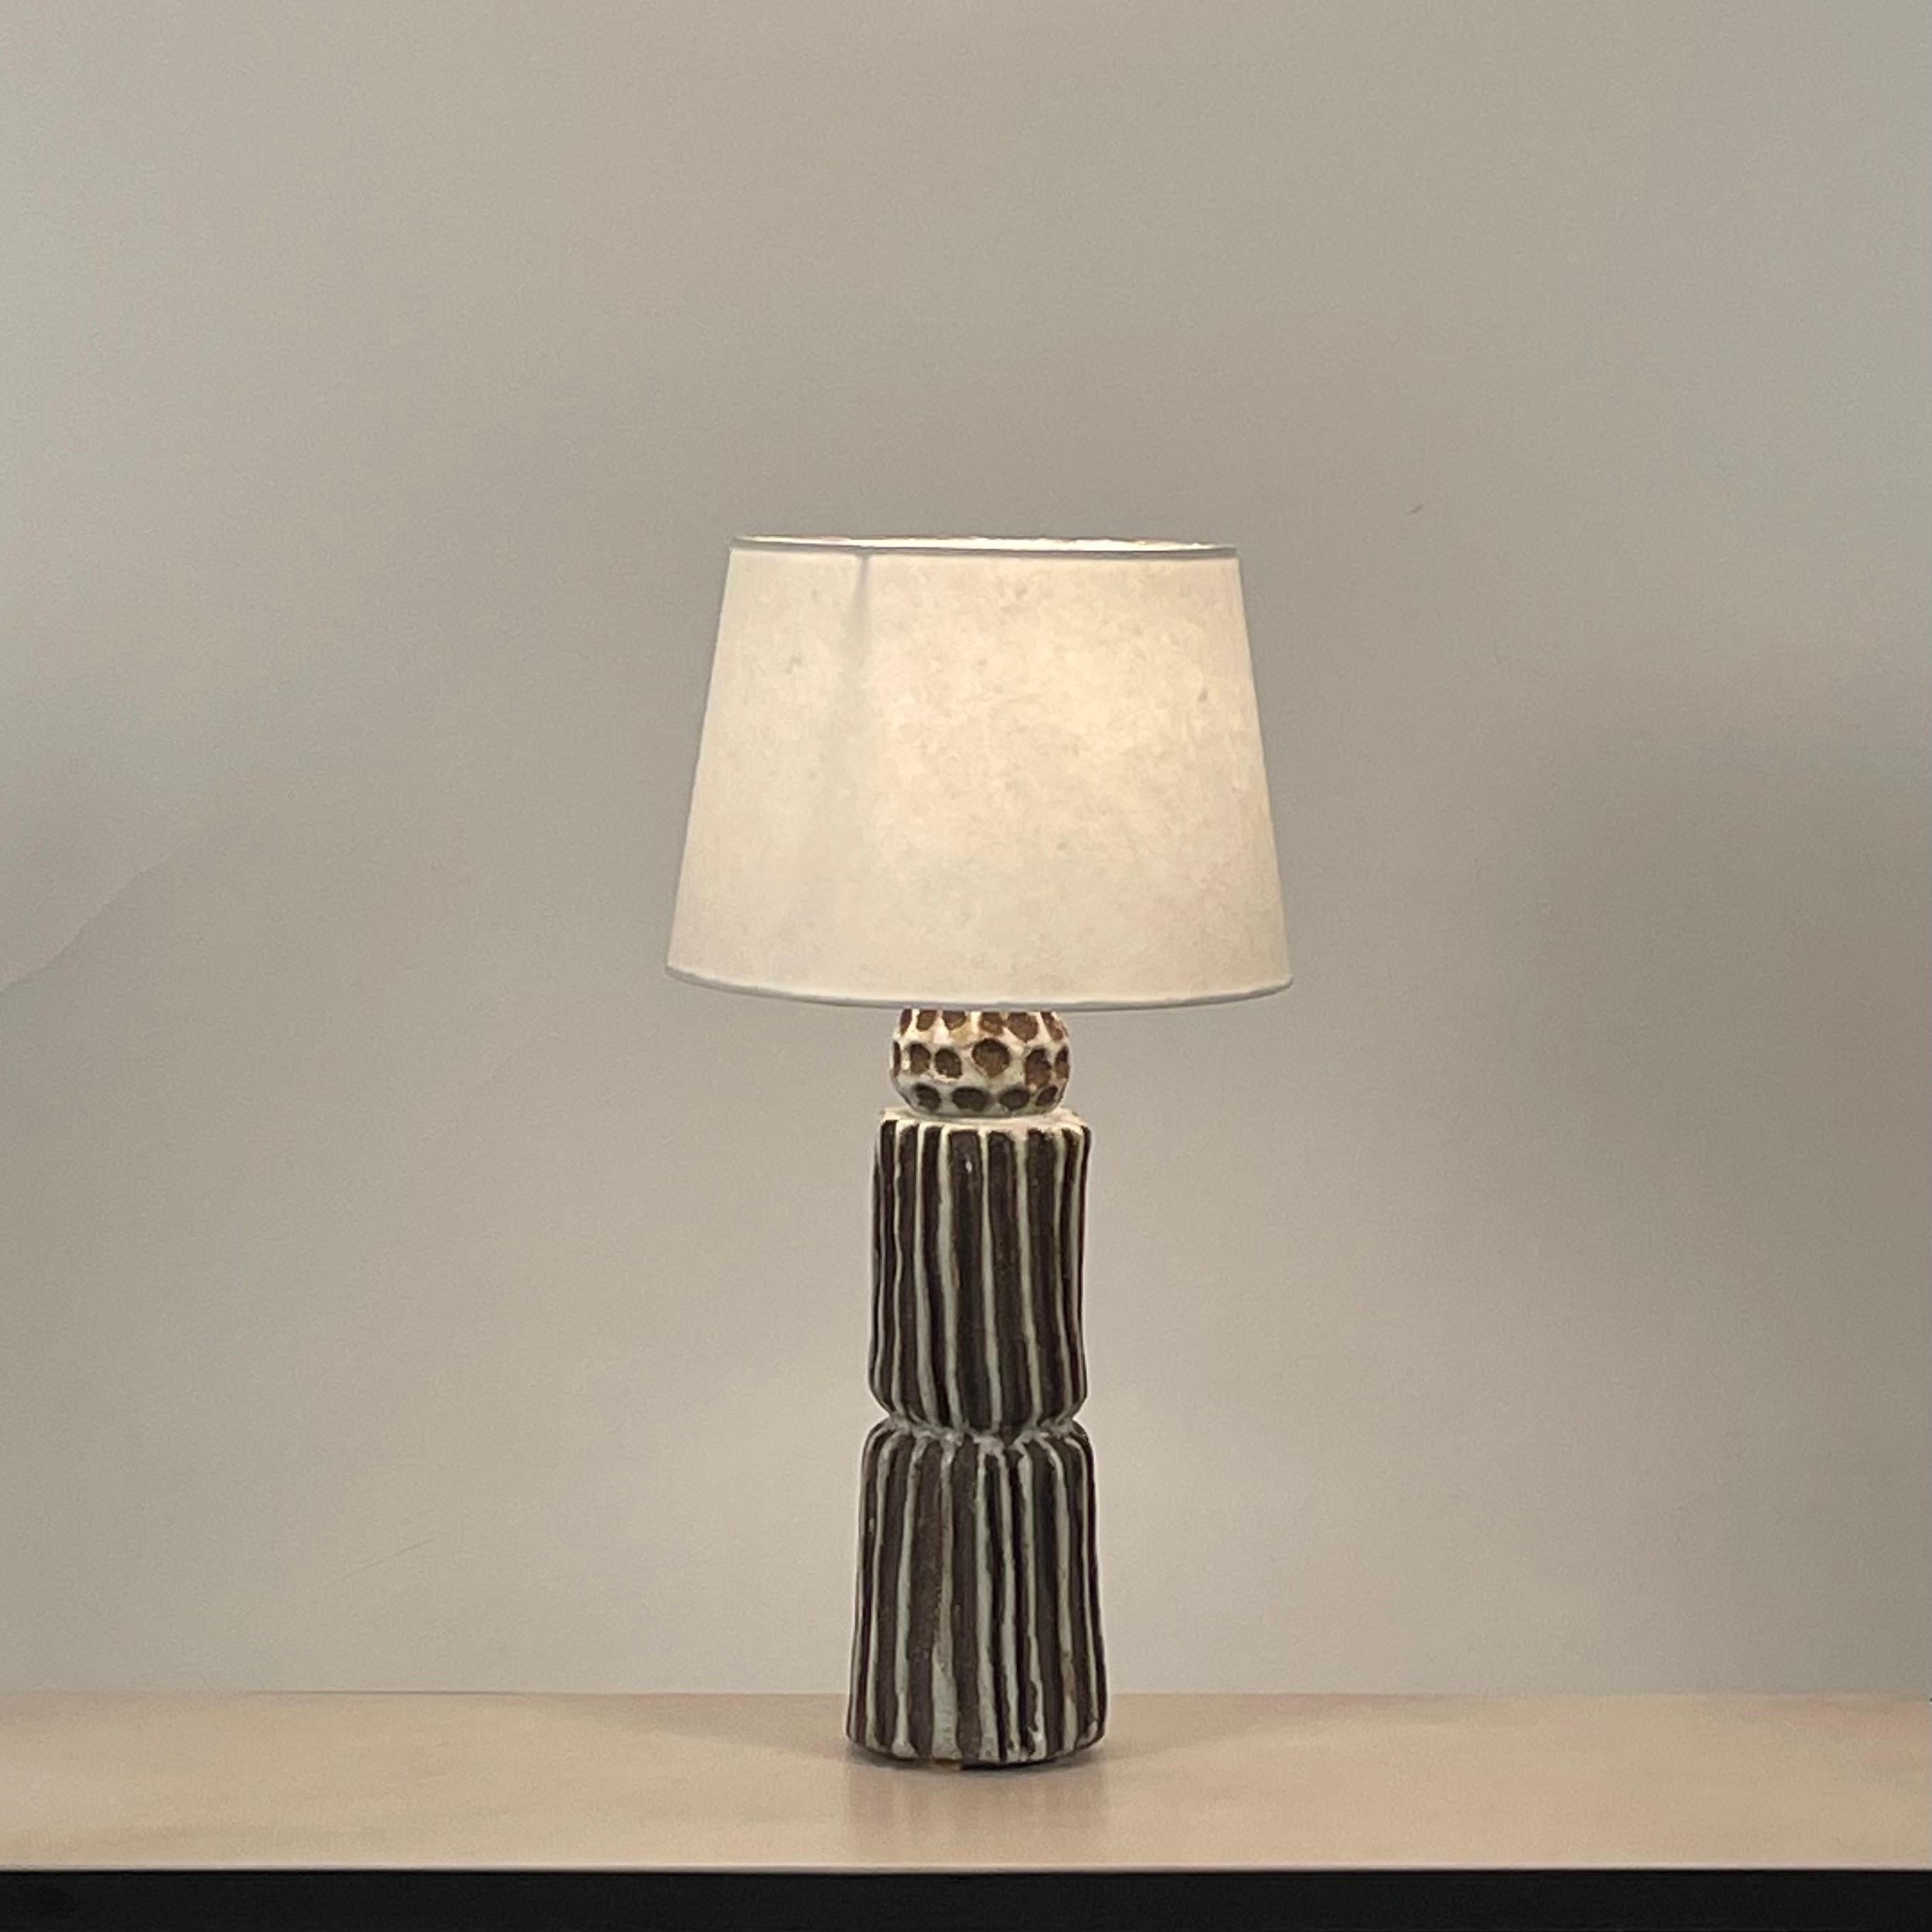 Pair of Large 'Sillons' lamps with parchment shades by Design Frères.

Attractive Euro style shades with no finial. Wired with twist cord and 3-way switches.

Dimensions listed are the overall dimensions of the lamp with the shade, as